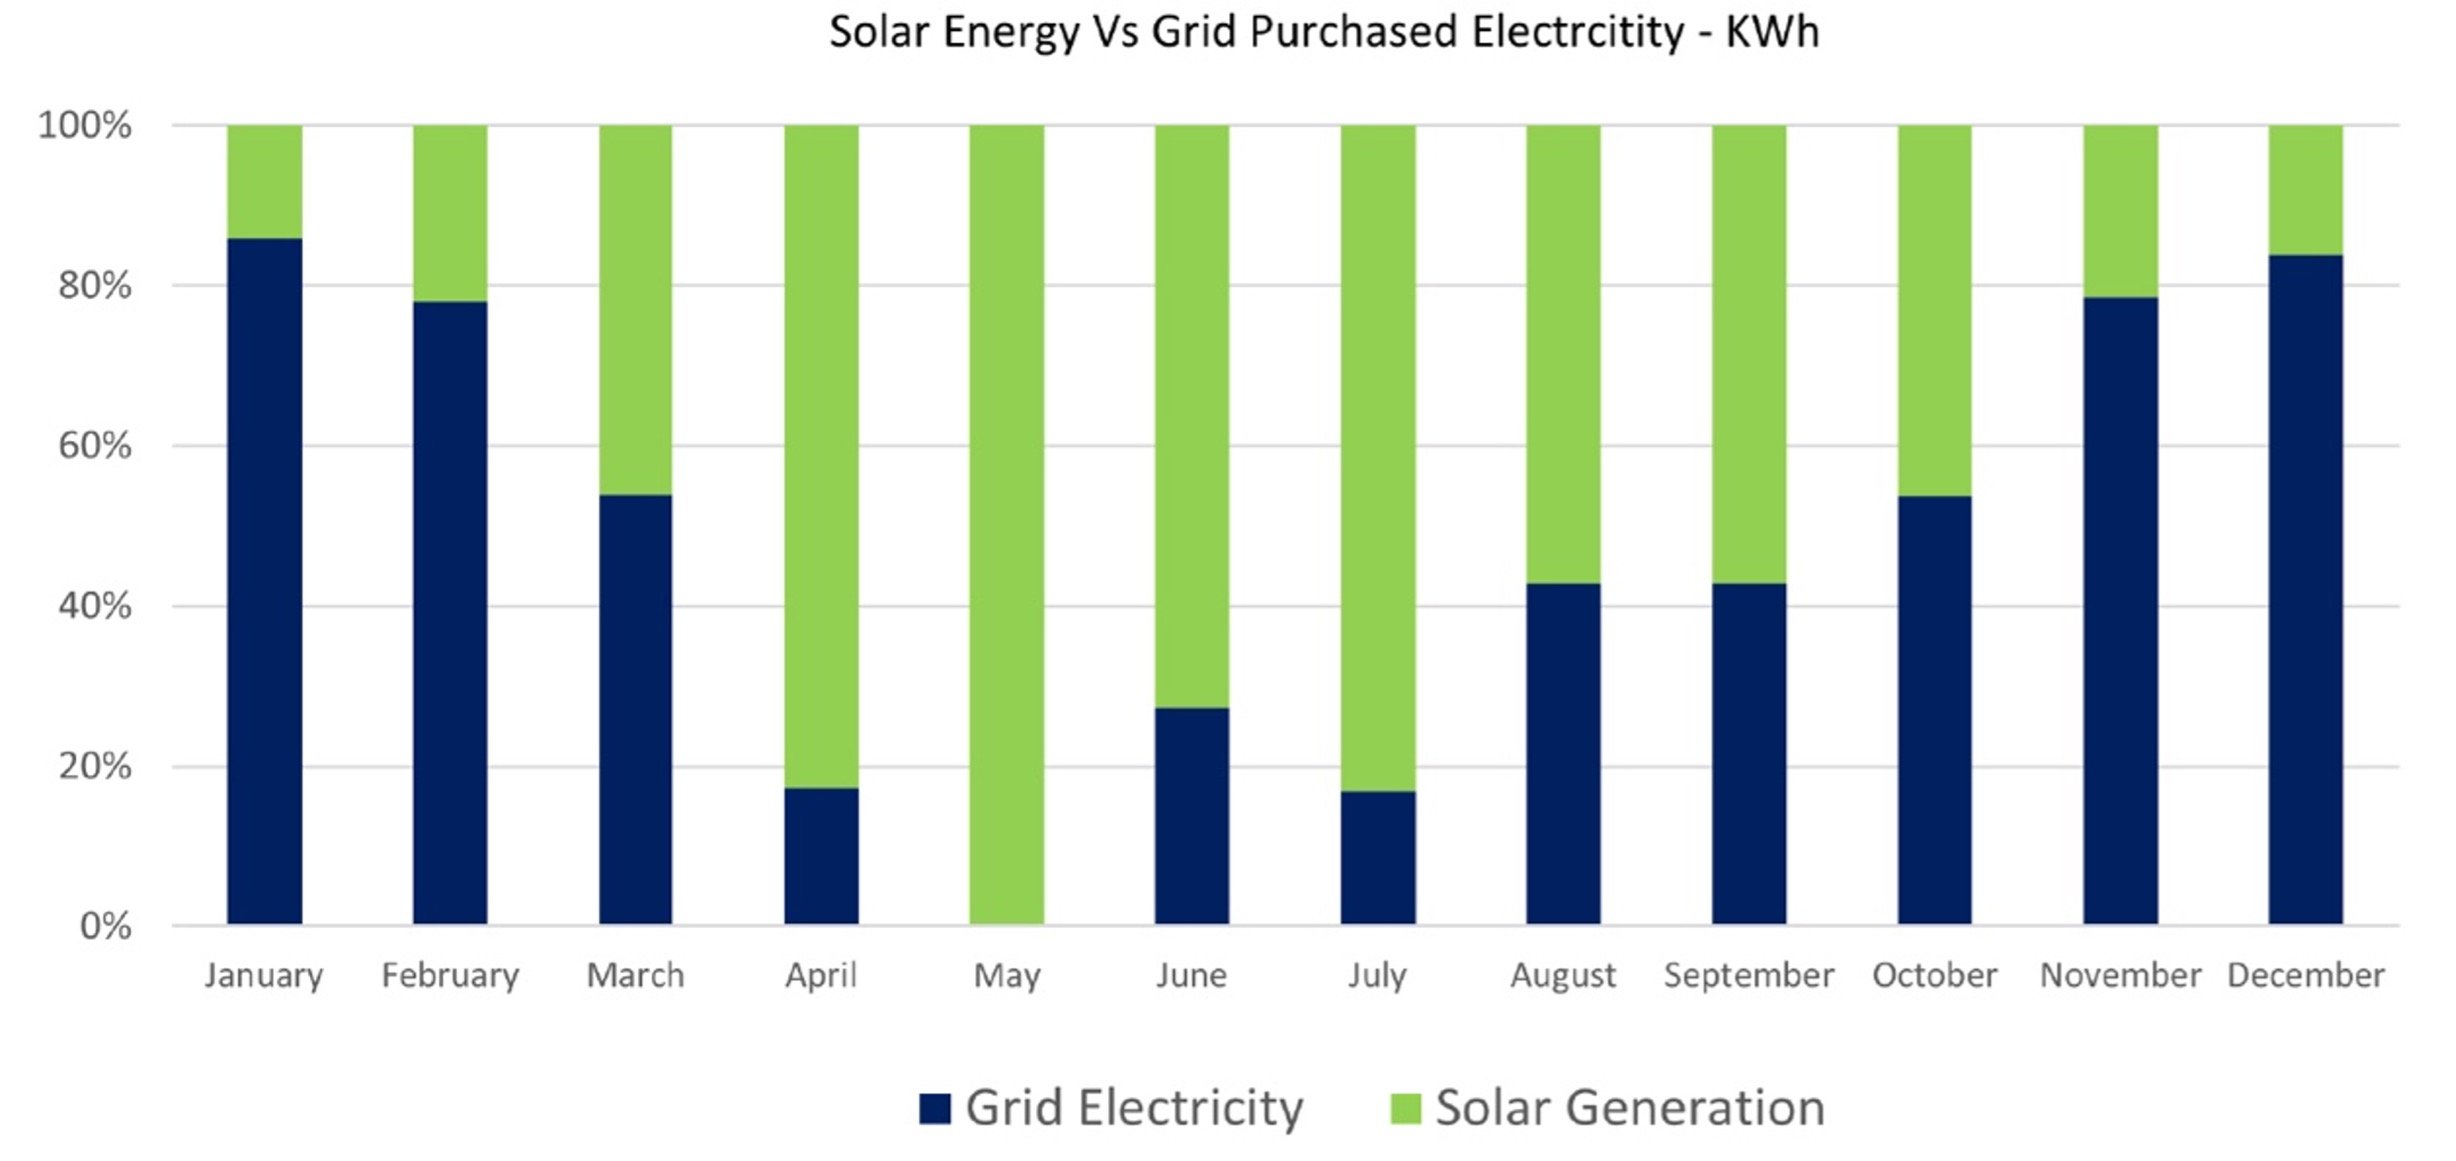 Solar energy vs grid purchased electricity